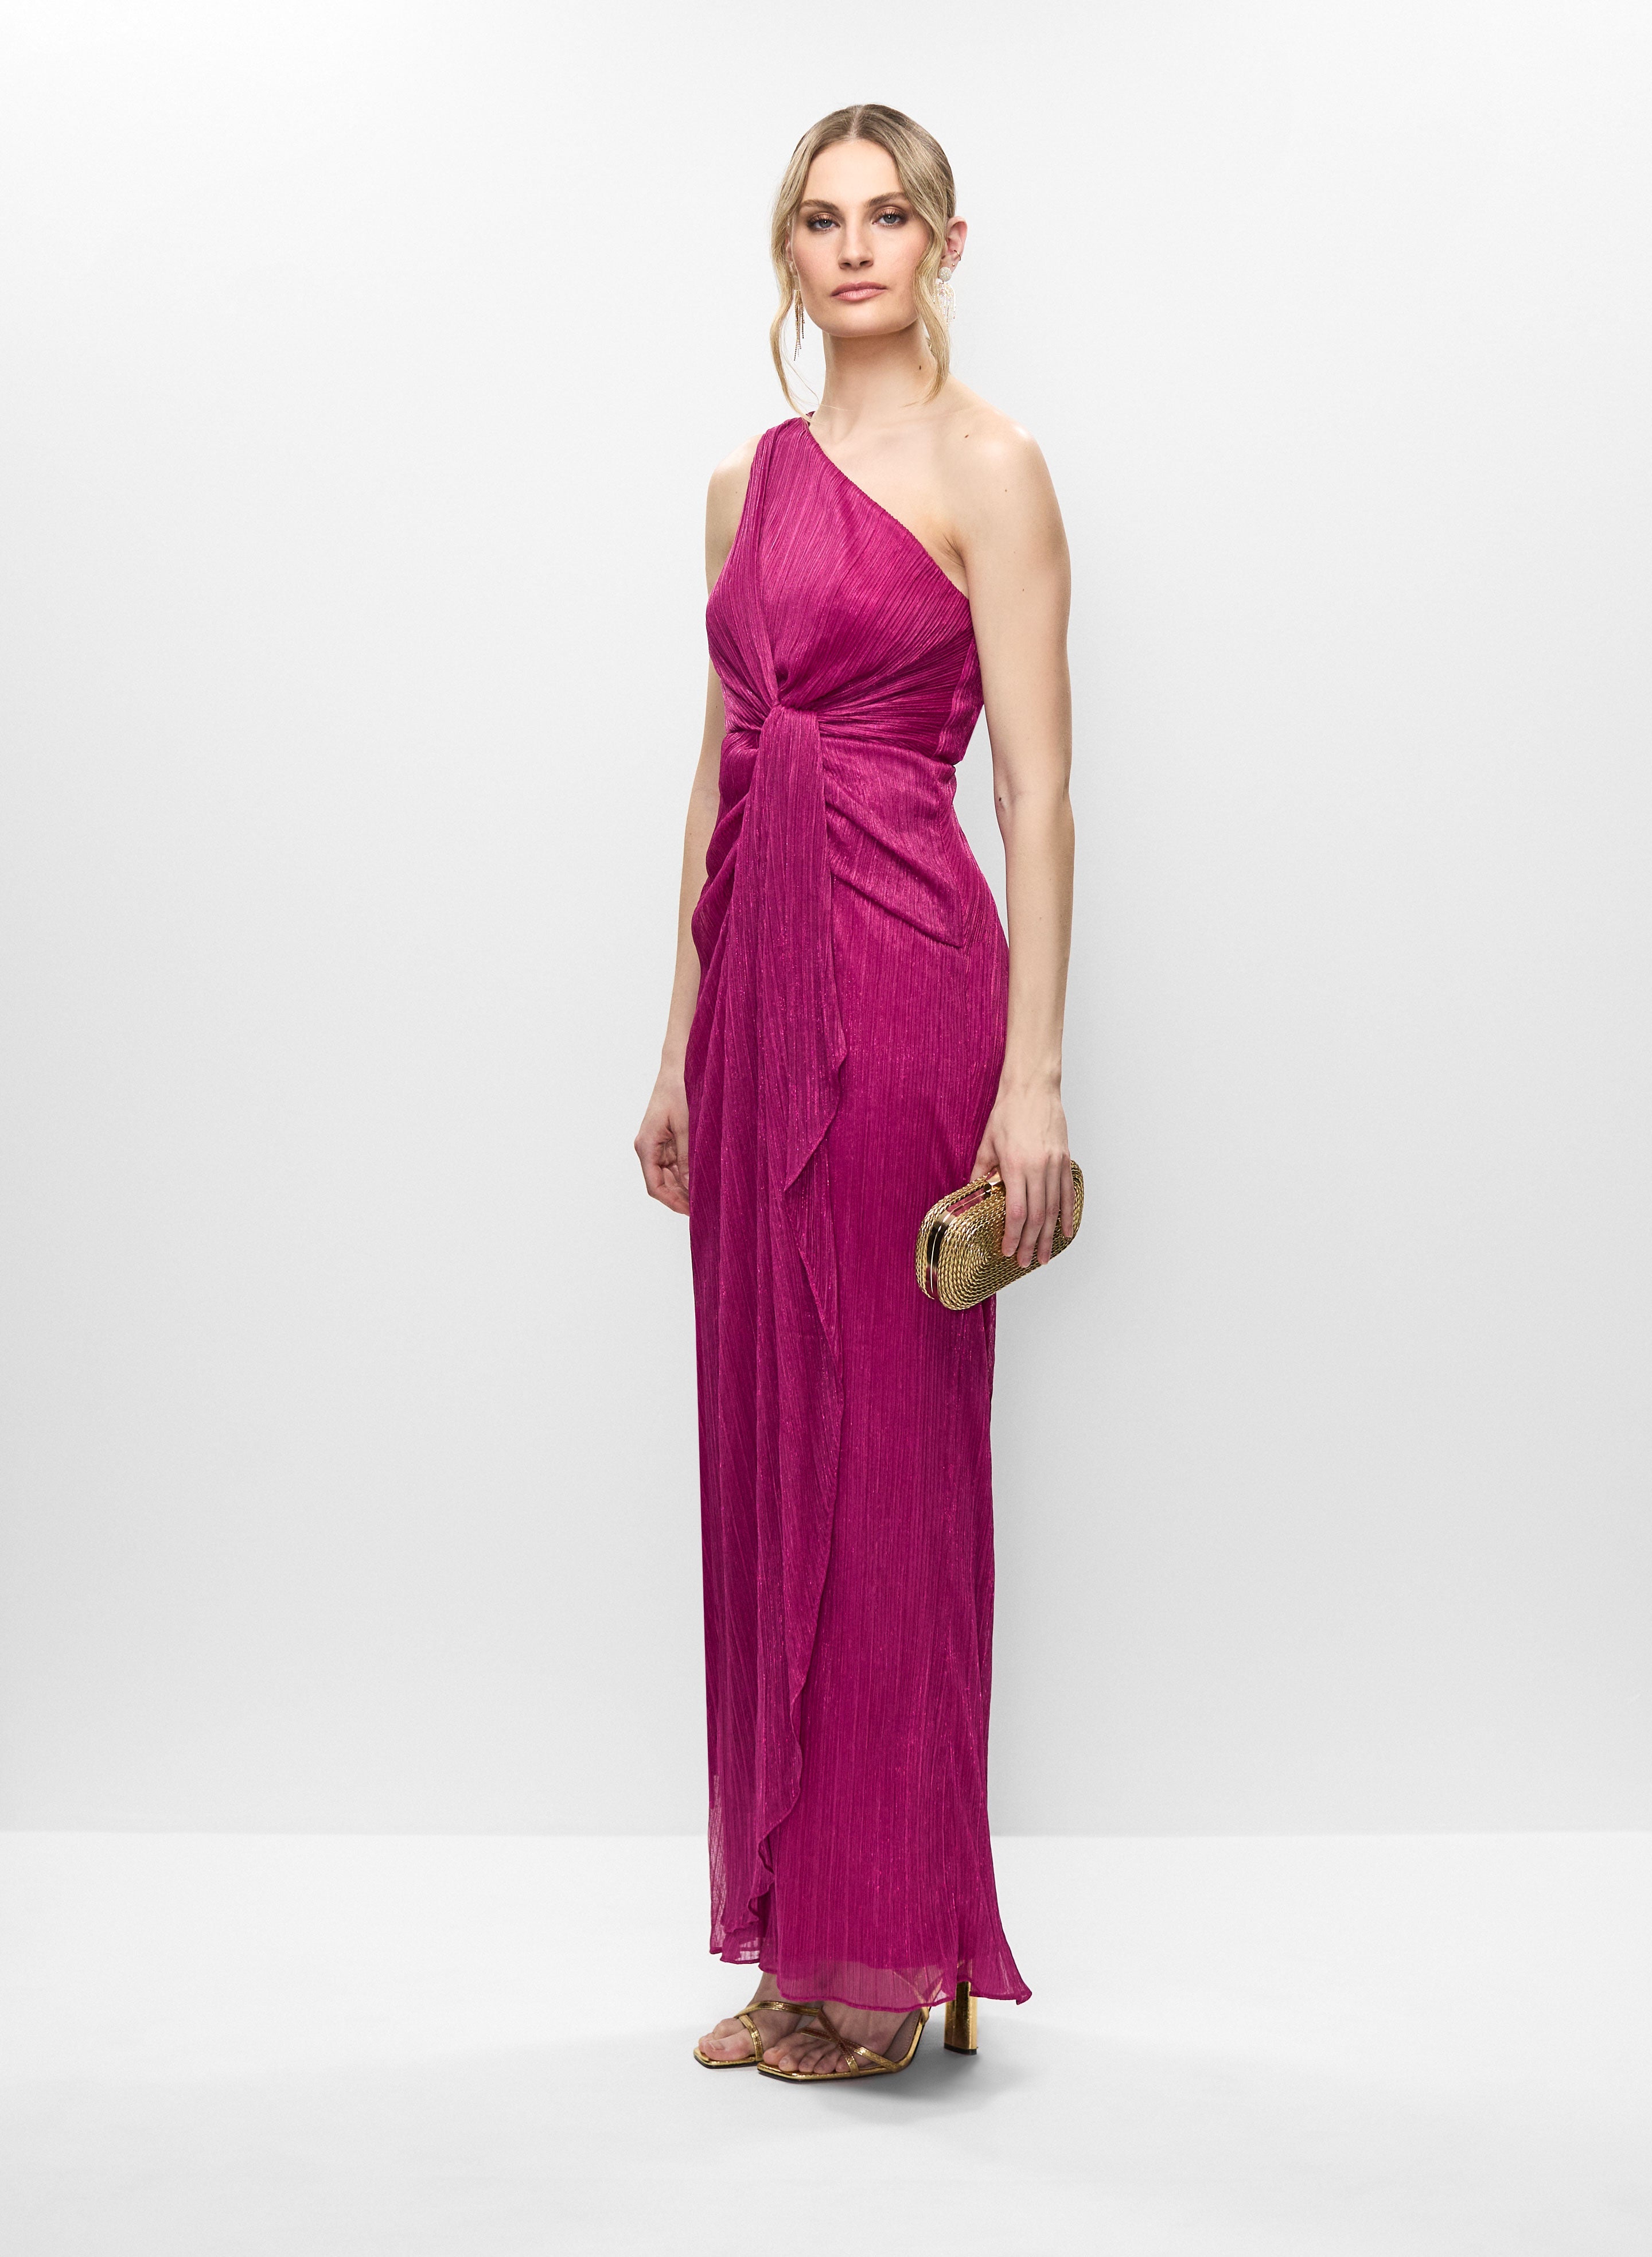 Adrianna Papell - Metallic One-Shoulder Gown